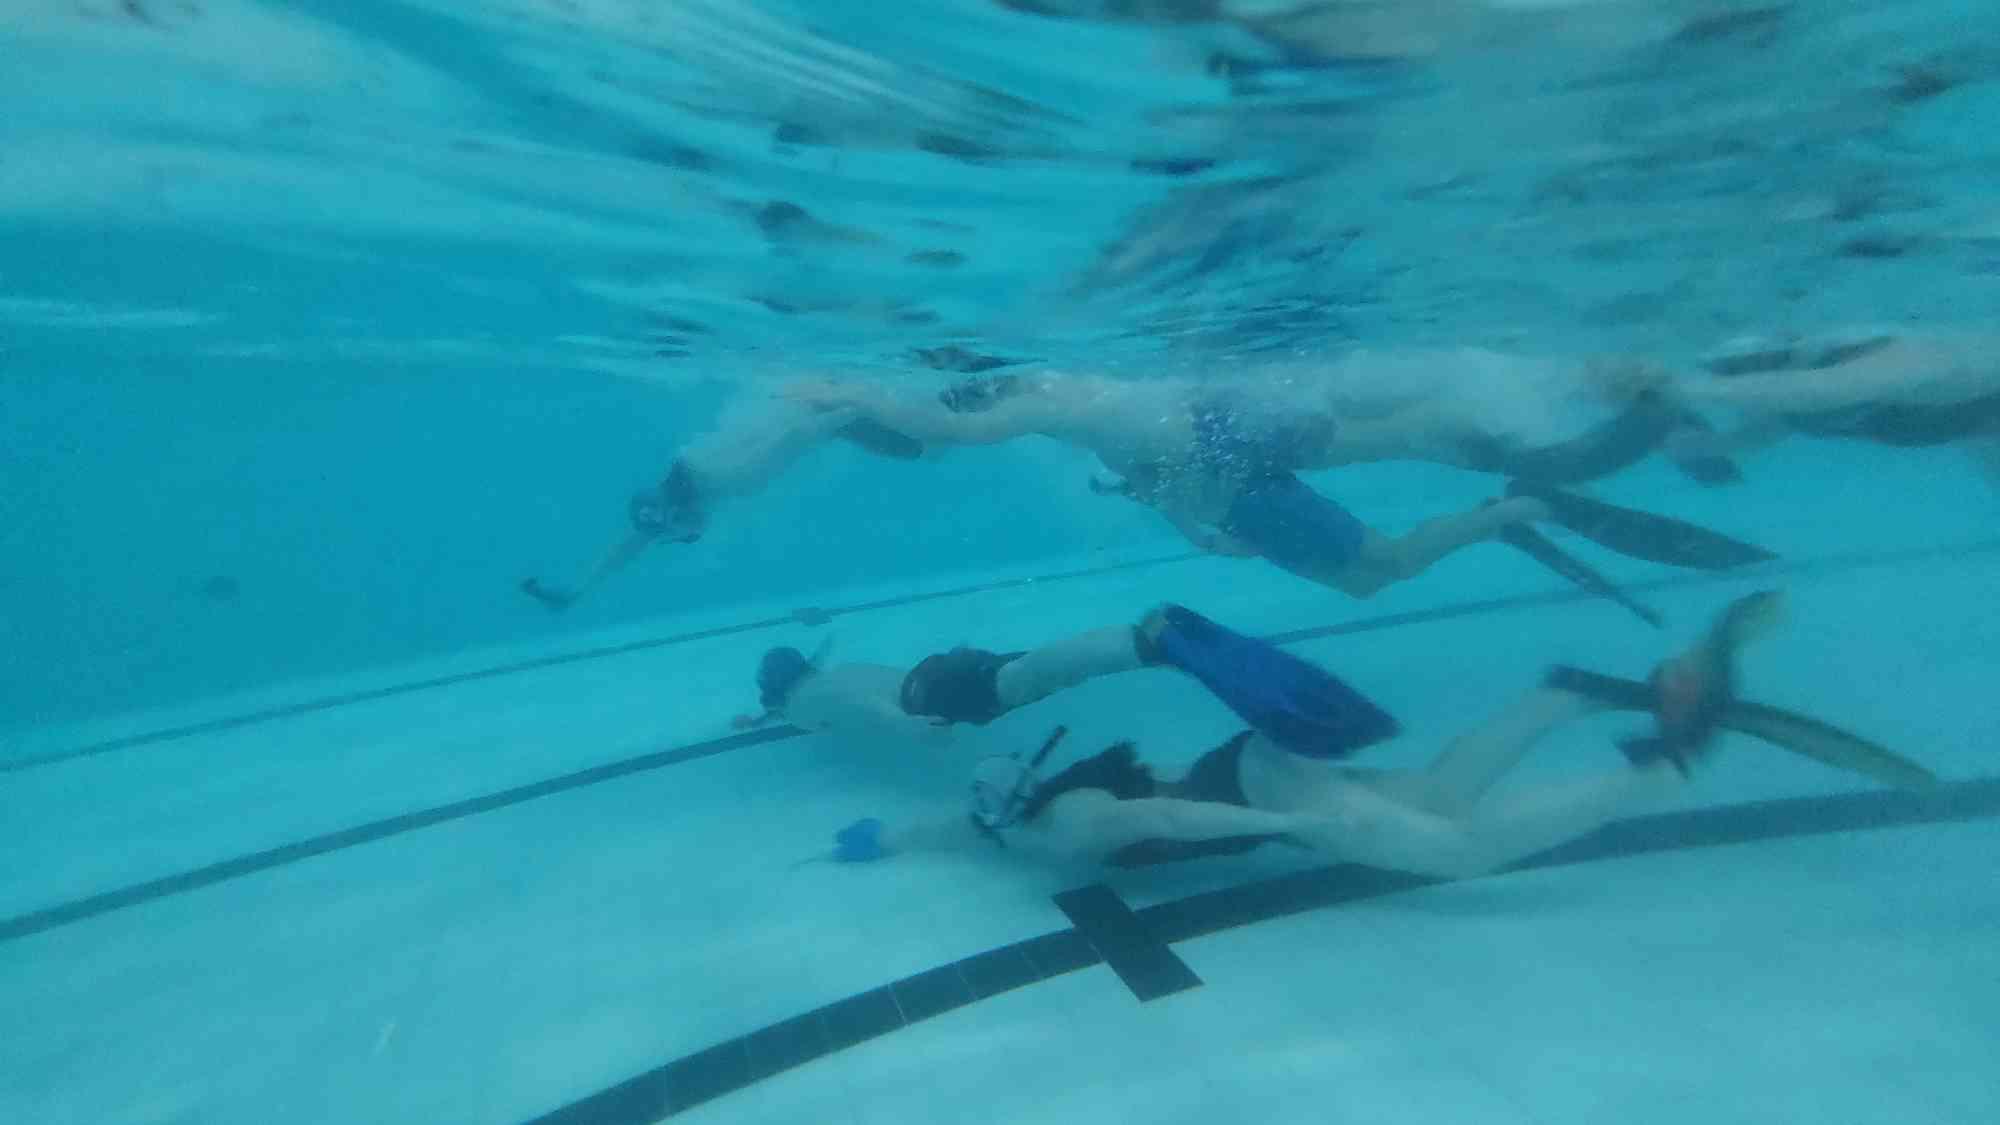 Underwater hockey players swimming for the puck